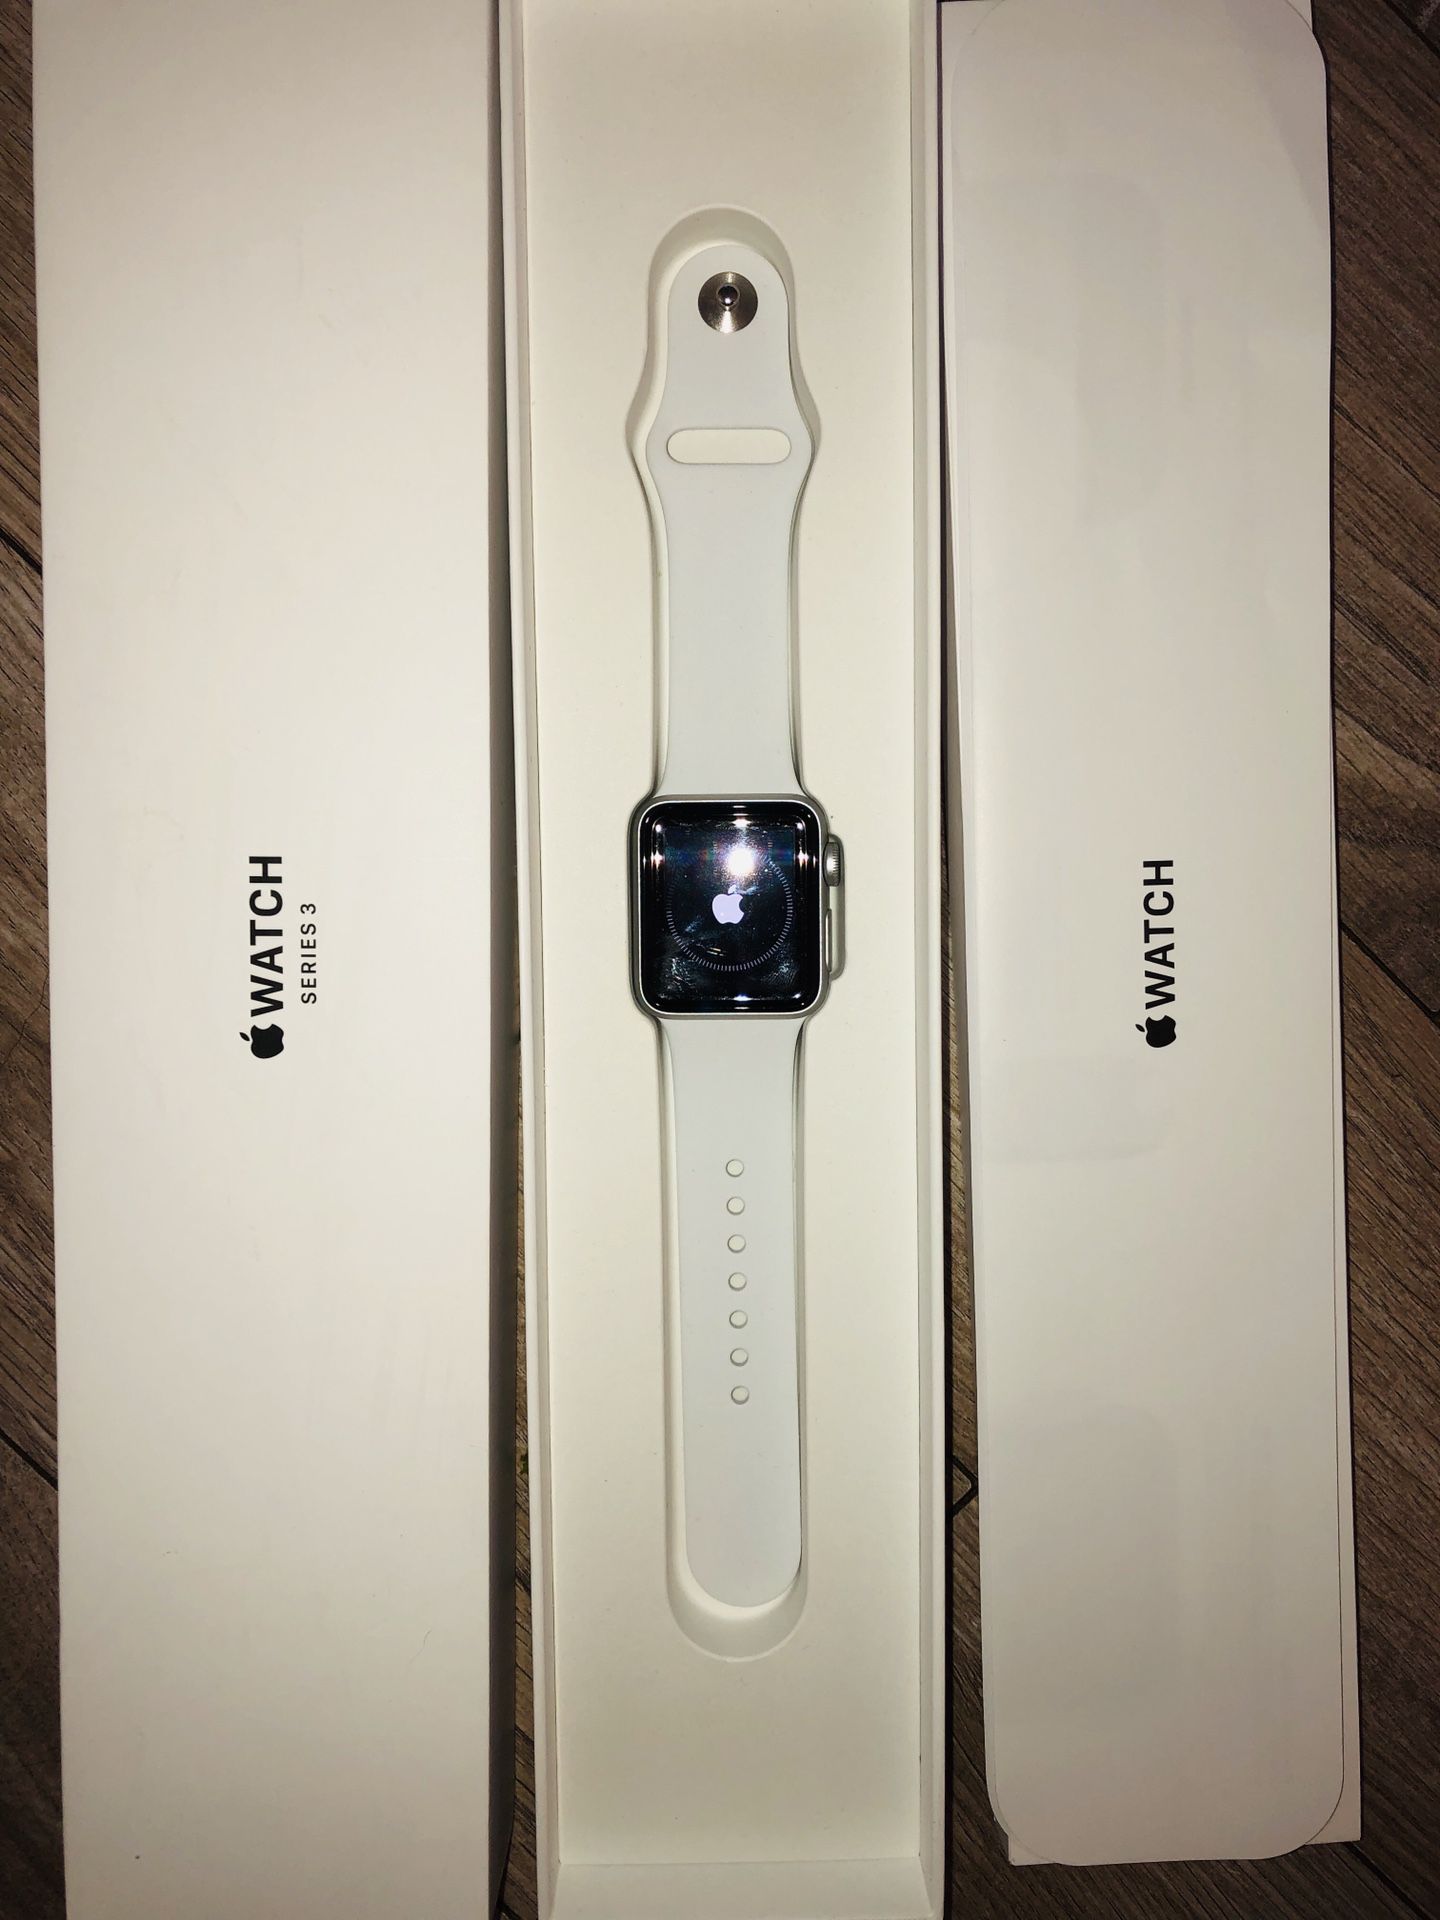 White/Silver 38 mm APPLE WATCH Series 3 $300 no trades